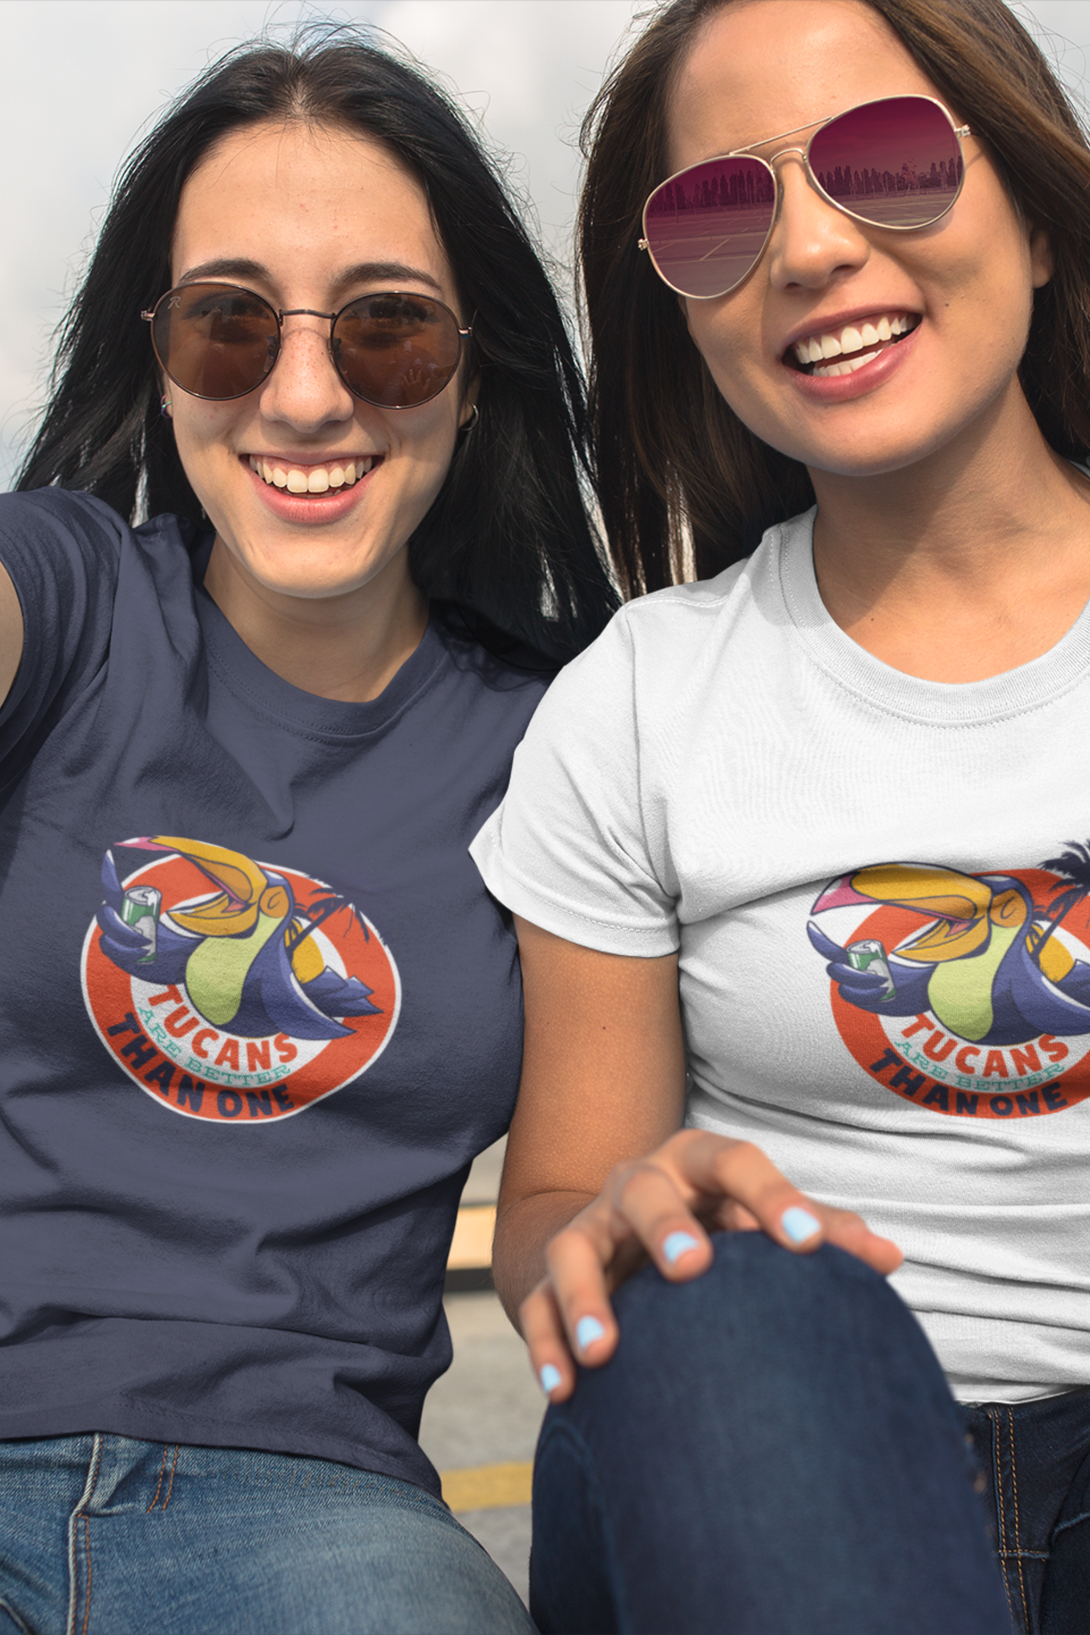 Tucans Are Better Tha One Printed T-Shirt For Women - WowWaves - 6